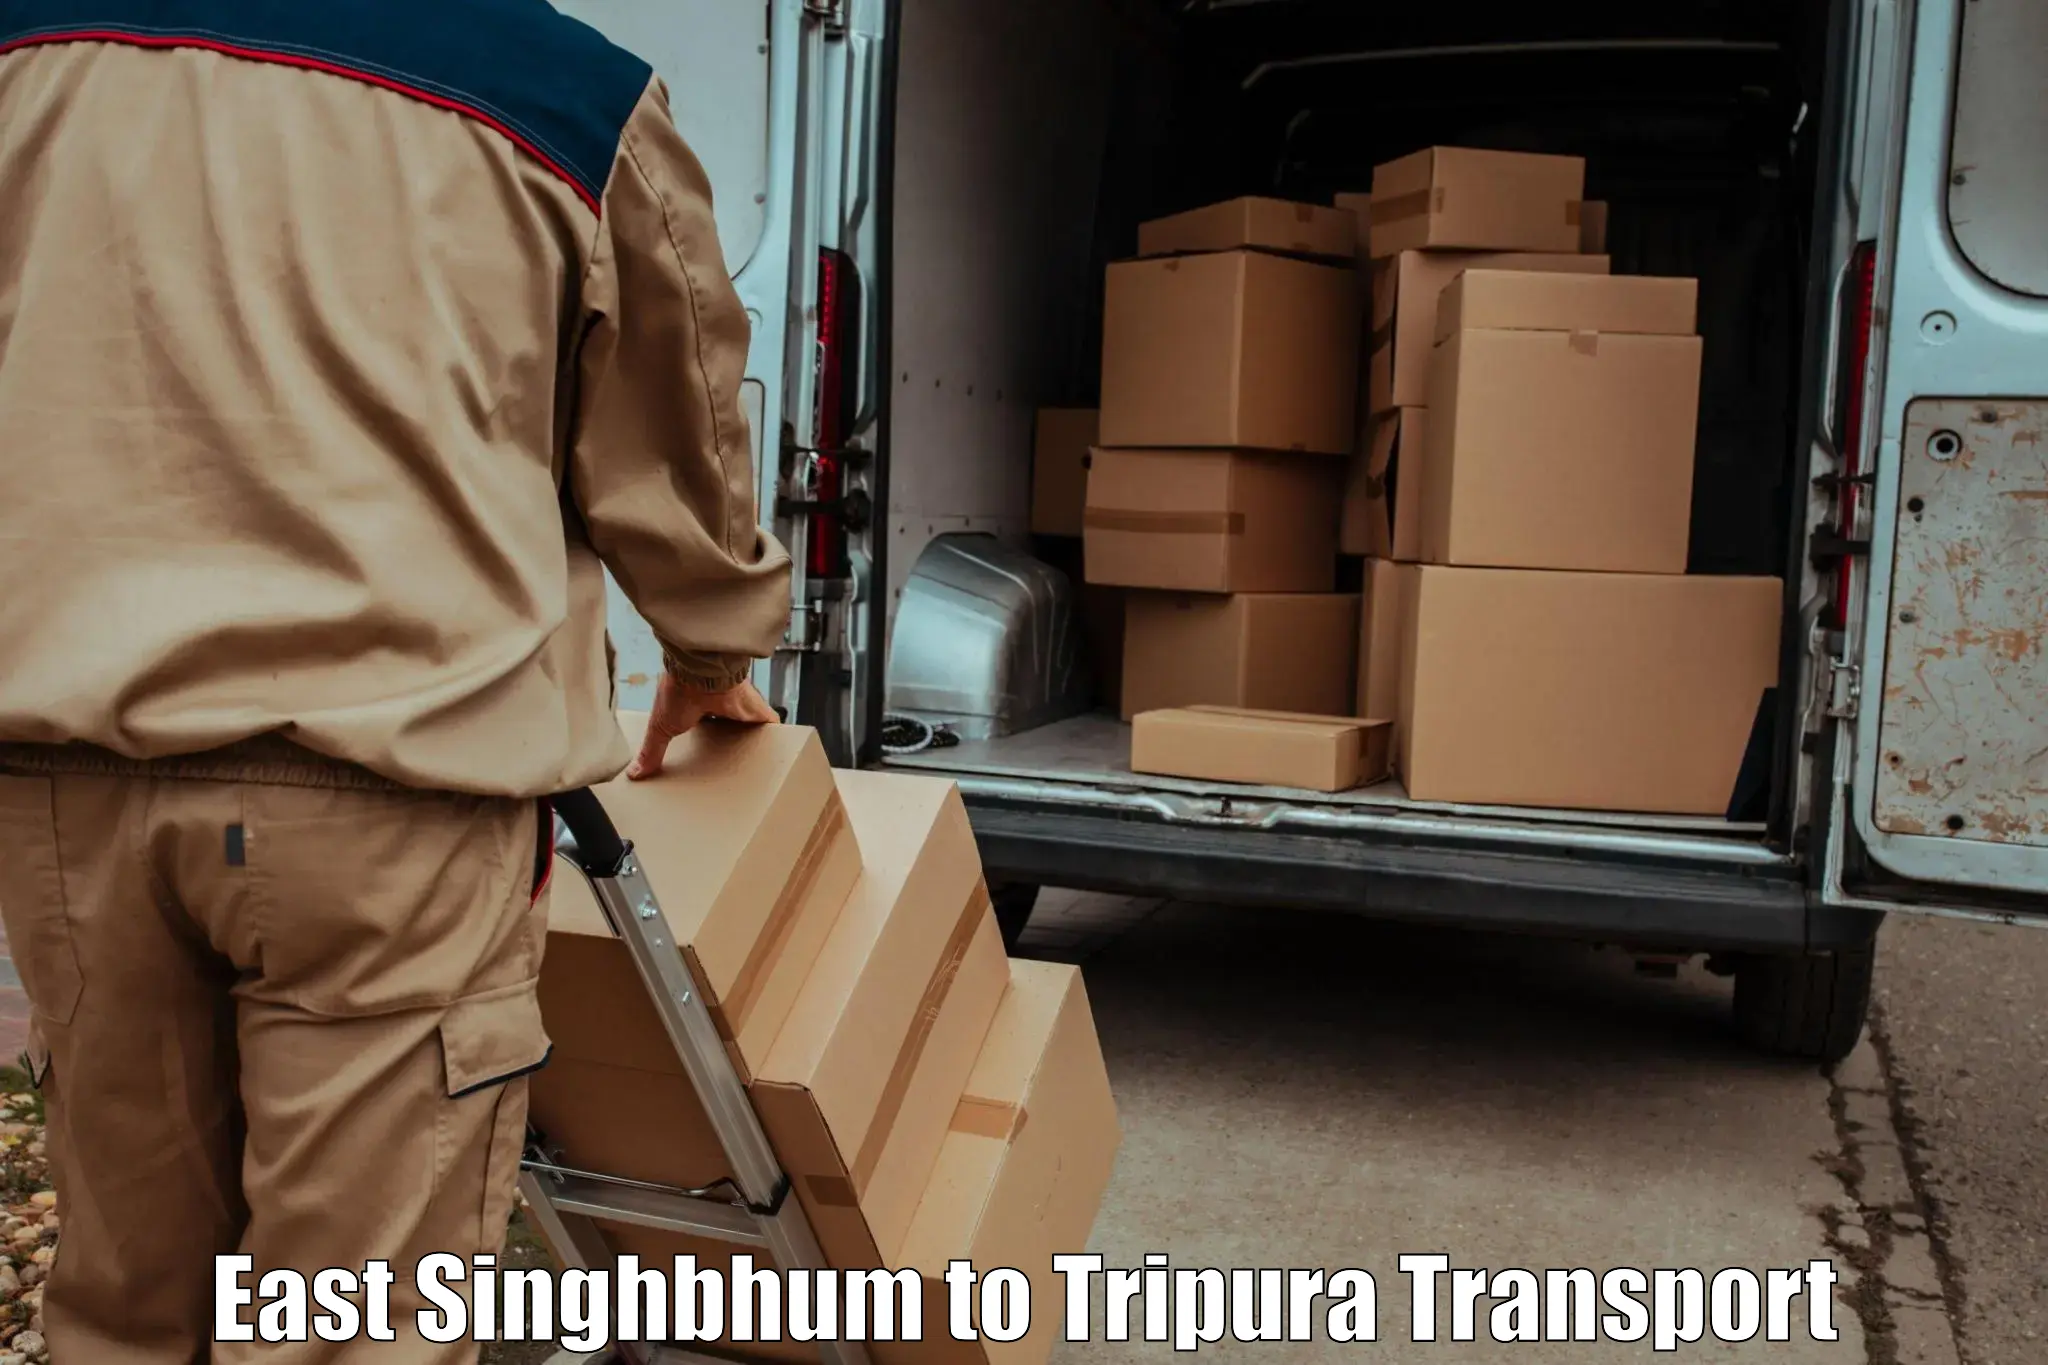 Air freight transport services in East Singhbhum to Udaipur Tripura